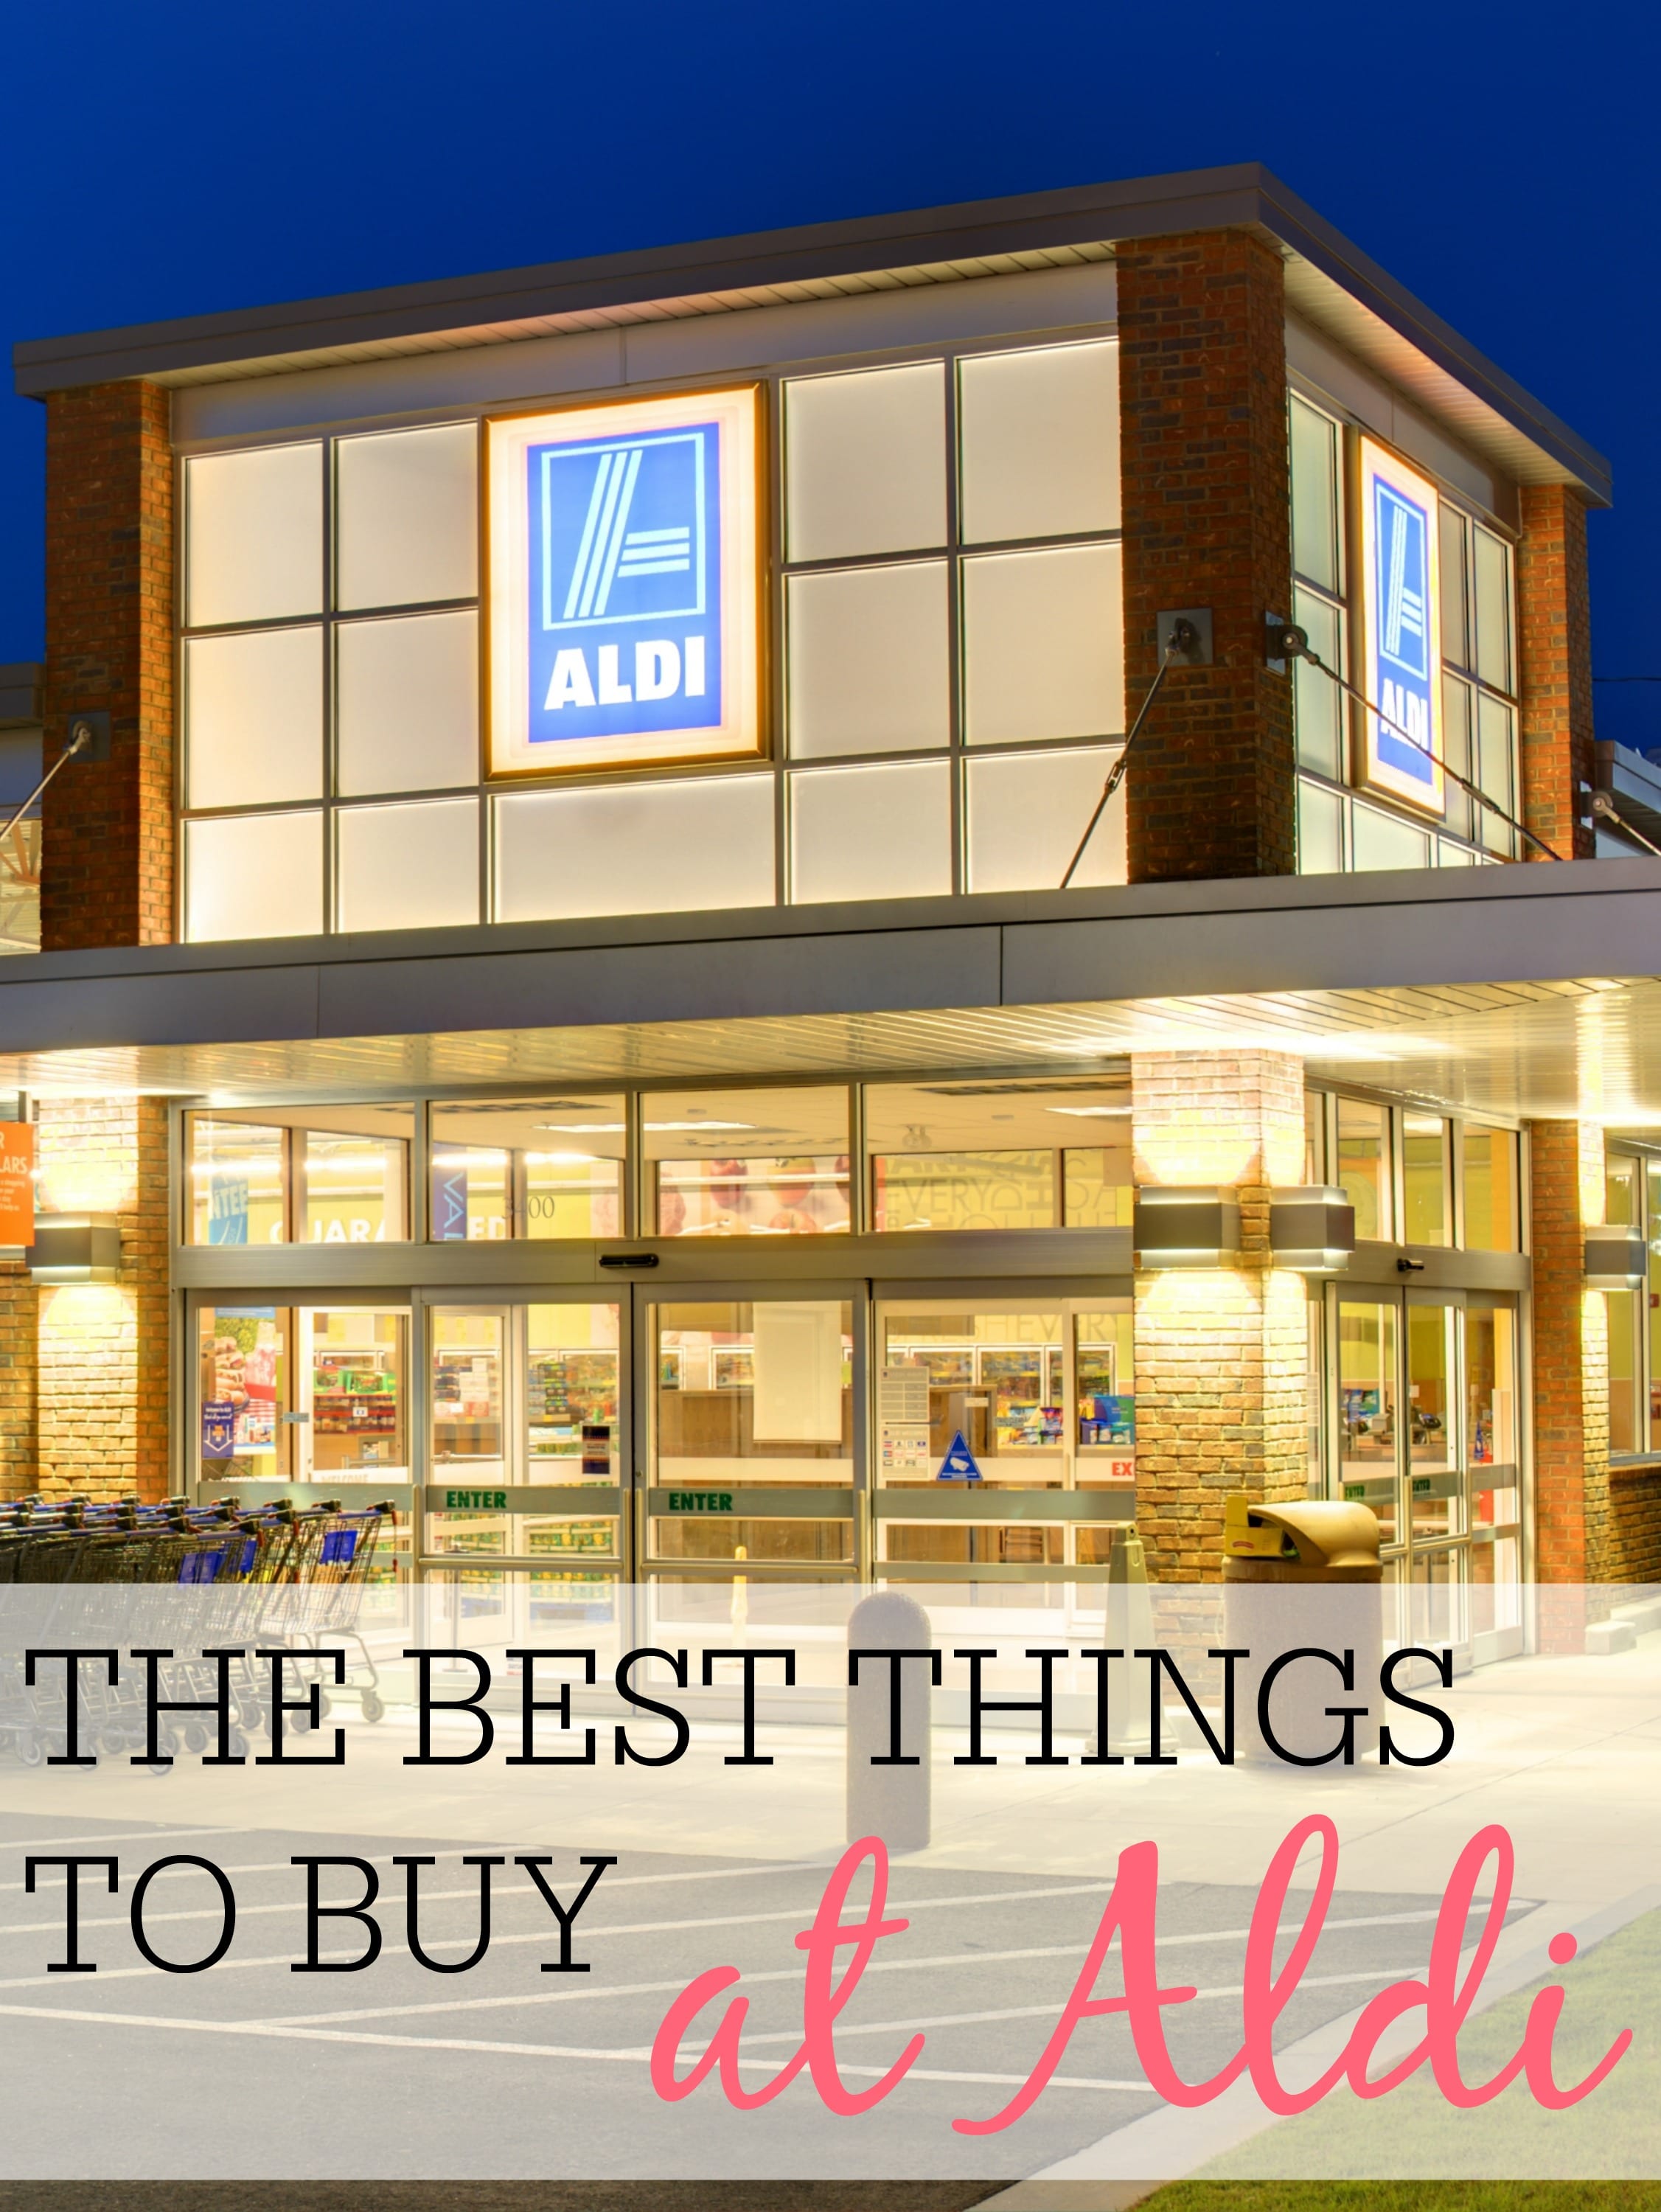 The best things to buy at aldi